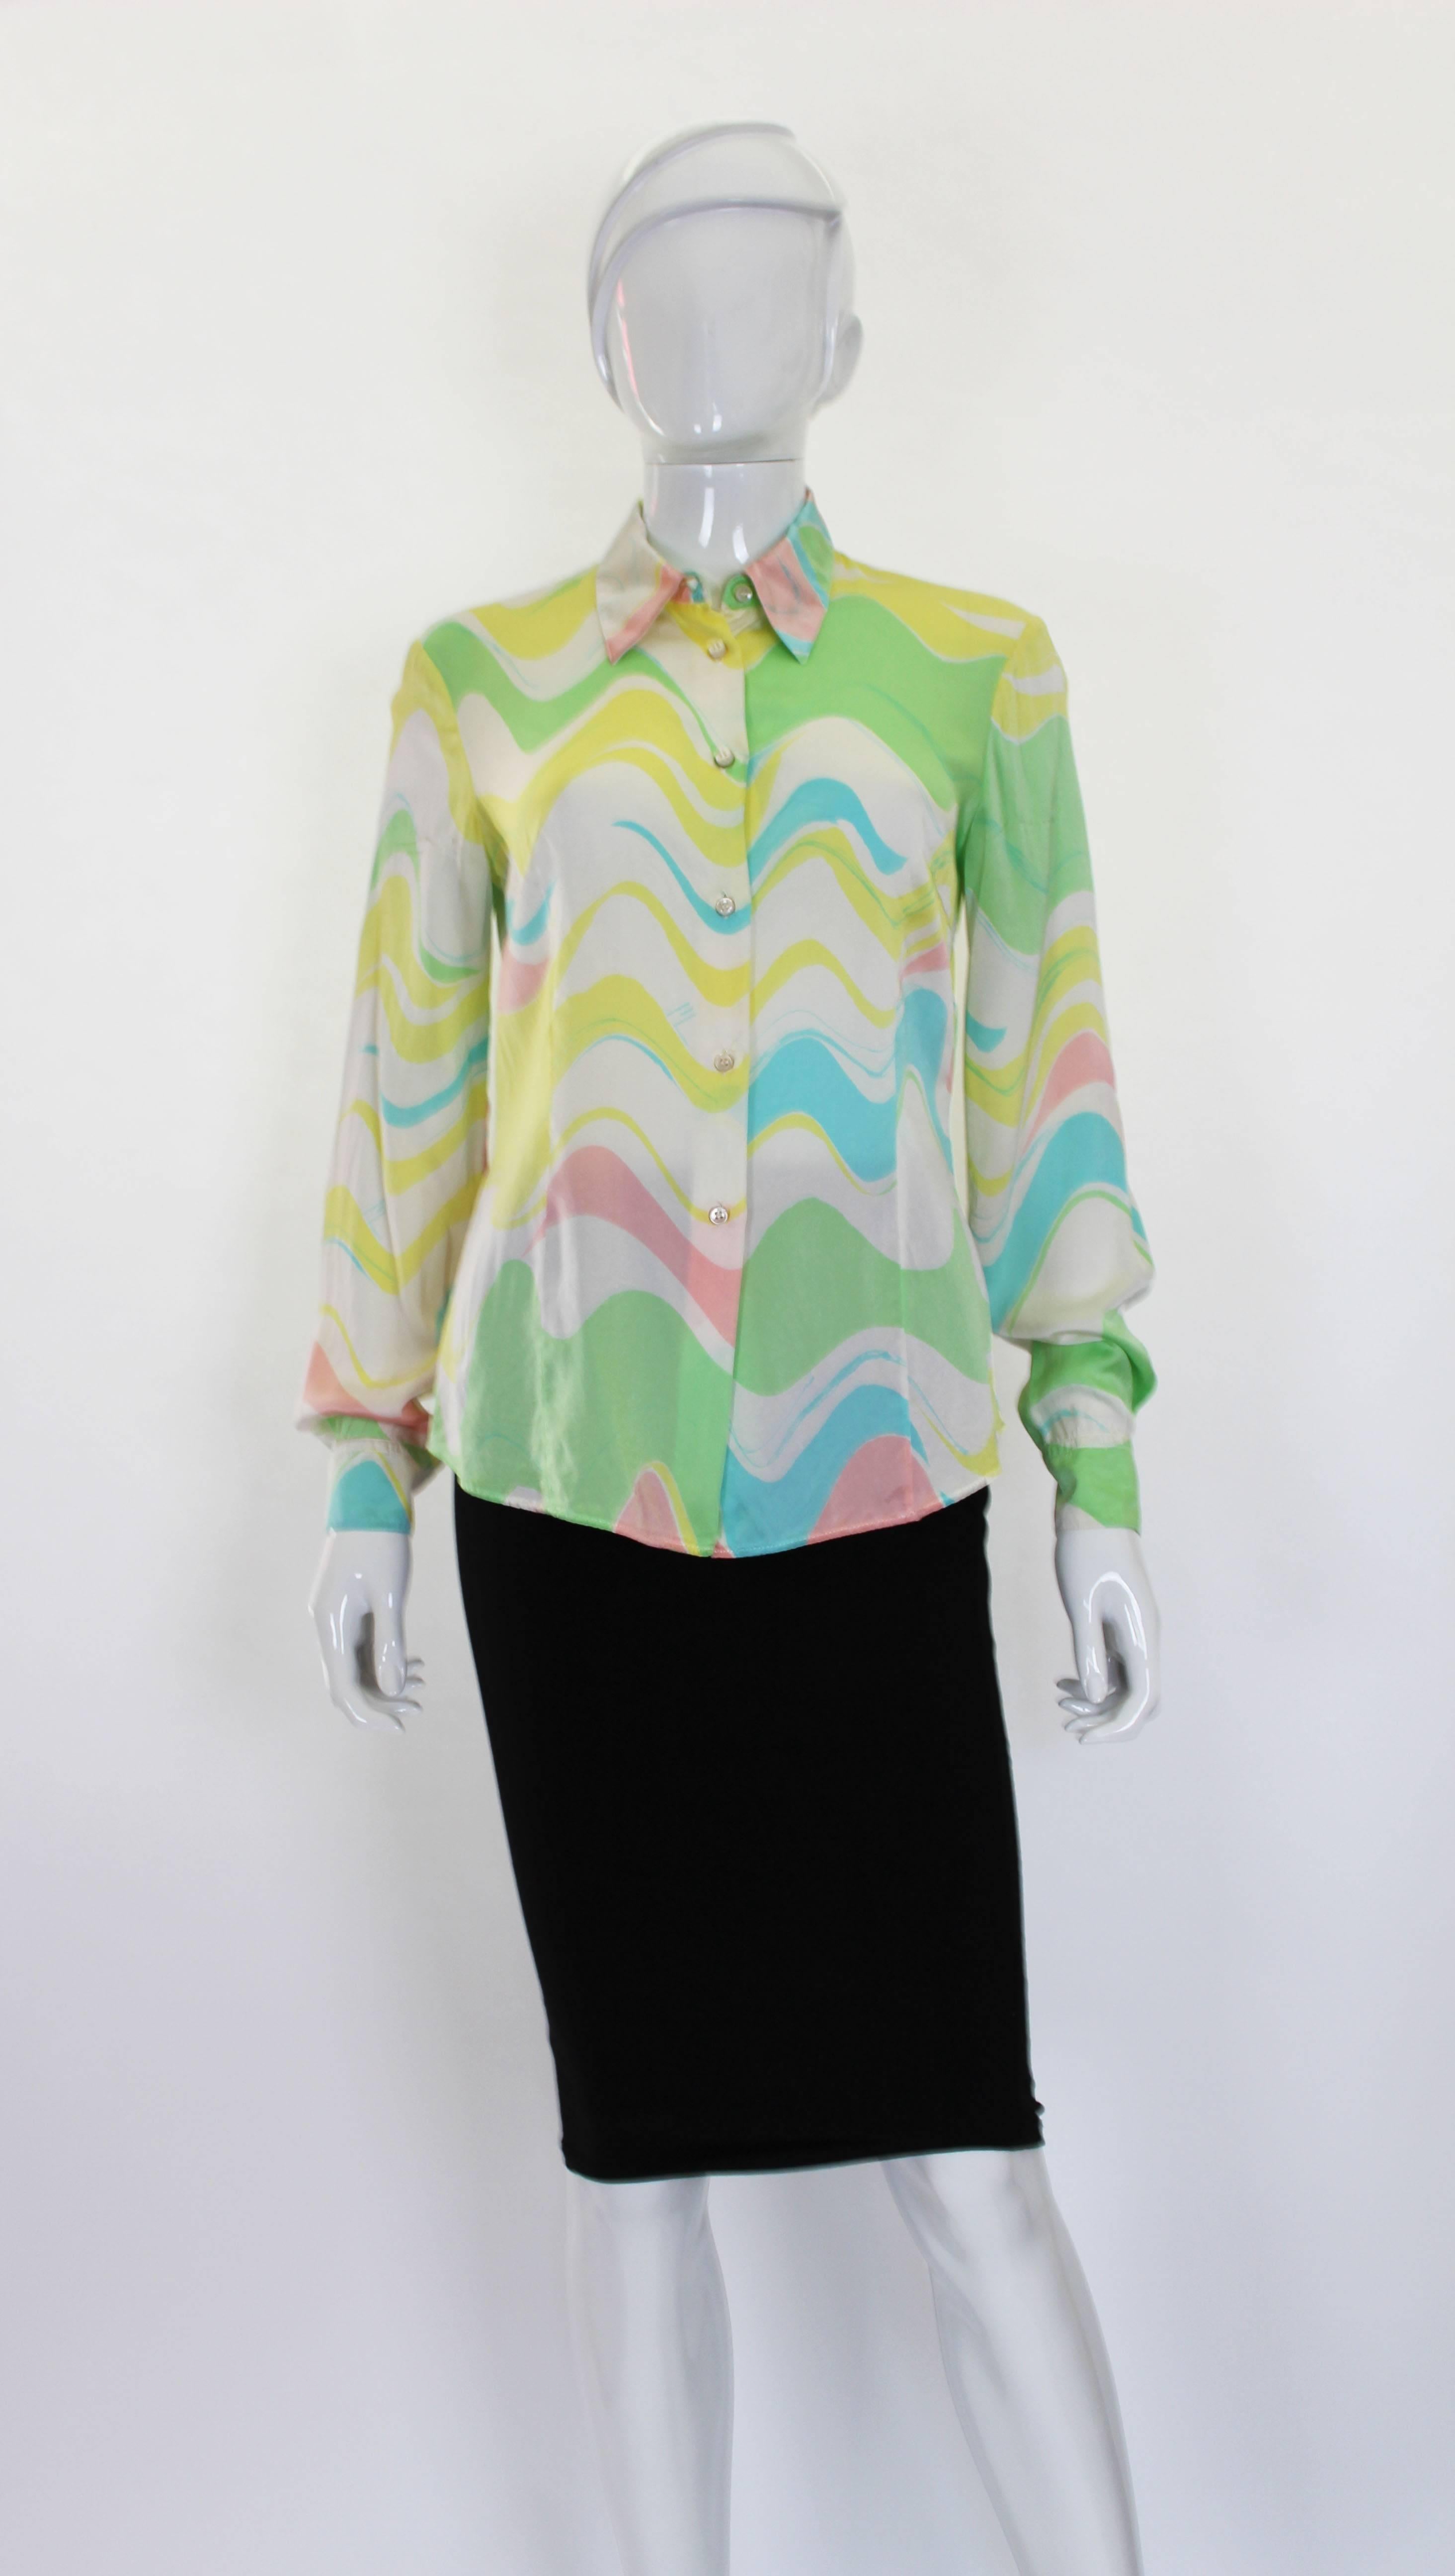 A pretty silk satin  blouse from Italian fashion house Missoni. In a colour palette of a white background, pinks, greens, yellow and blue. The blouse has a 6 button front and button cuffs.
